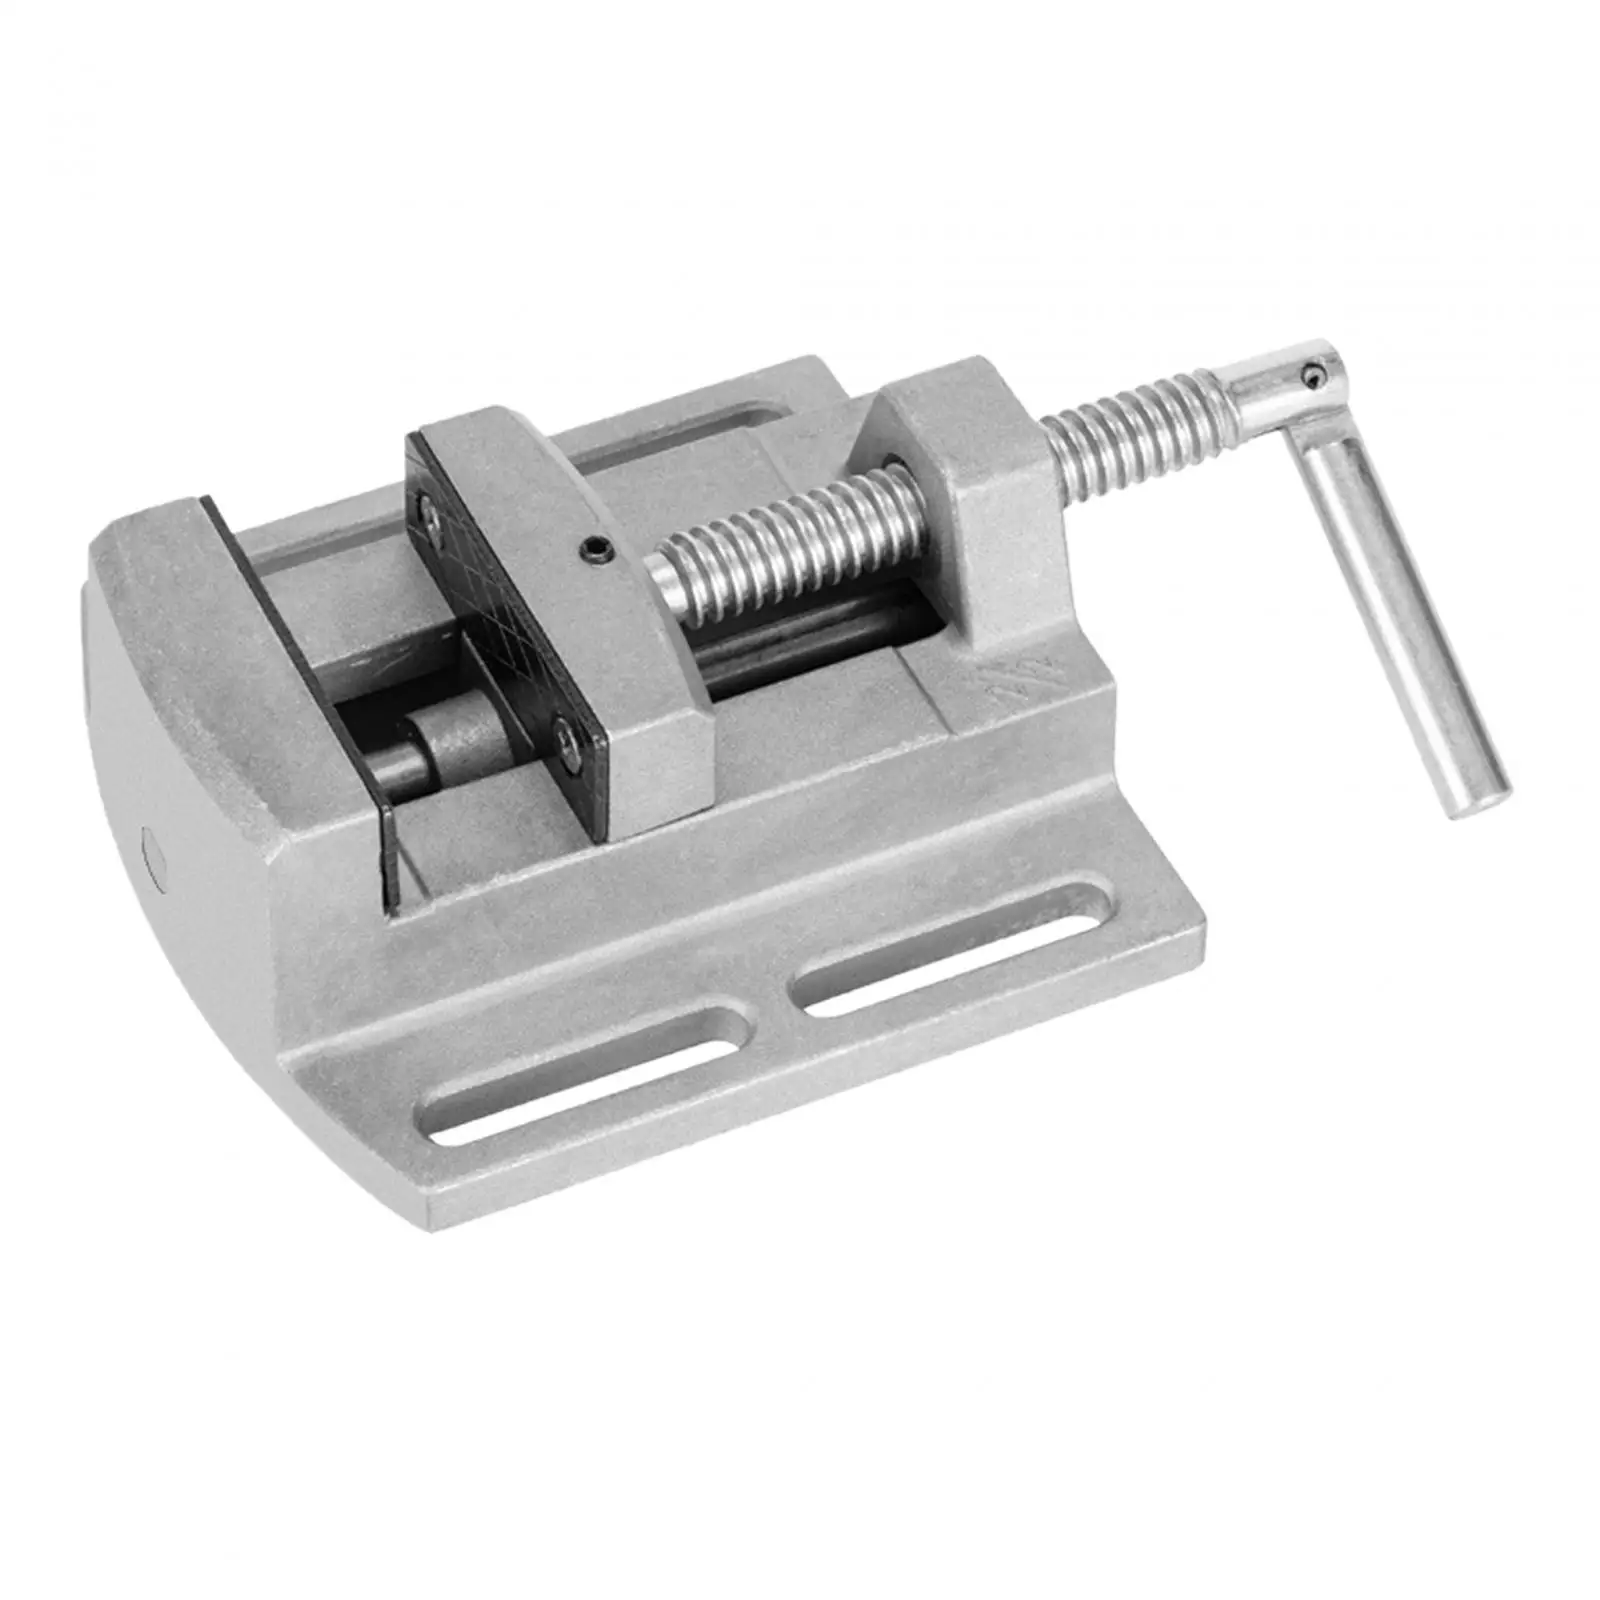 Drill Press Vise Portable Heavy Duty DIY Woodworking Clamps Jewelry Making Craft Building Work Metalworking Parallel Table Vise